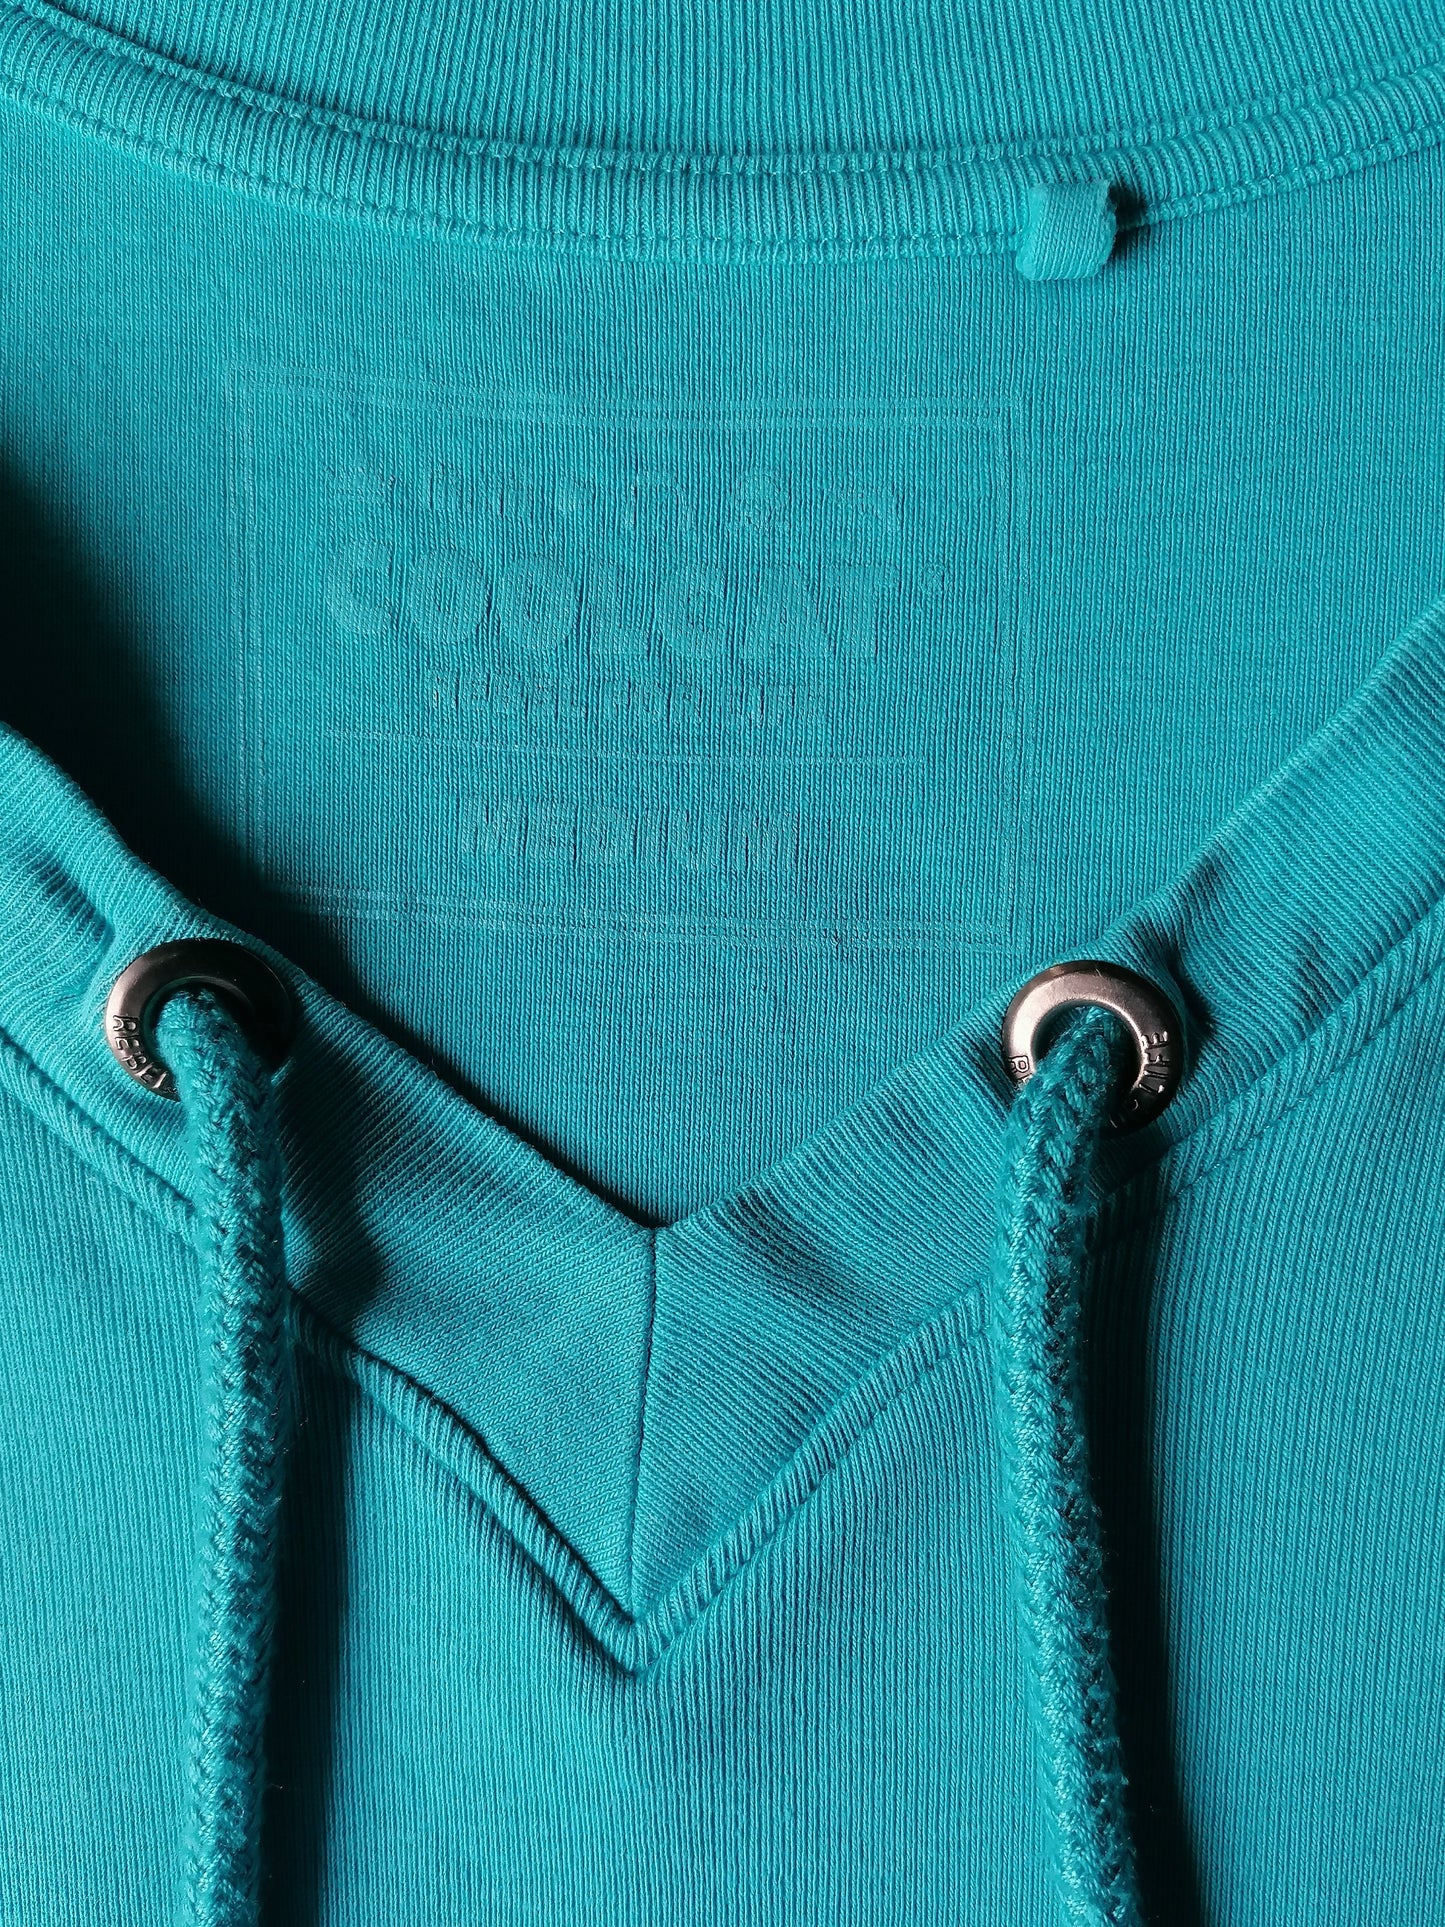 Coolcat shirt with V-neck and strings. Blue colored. Size M.